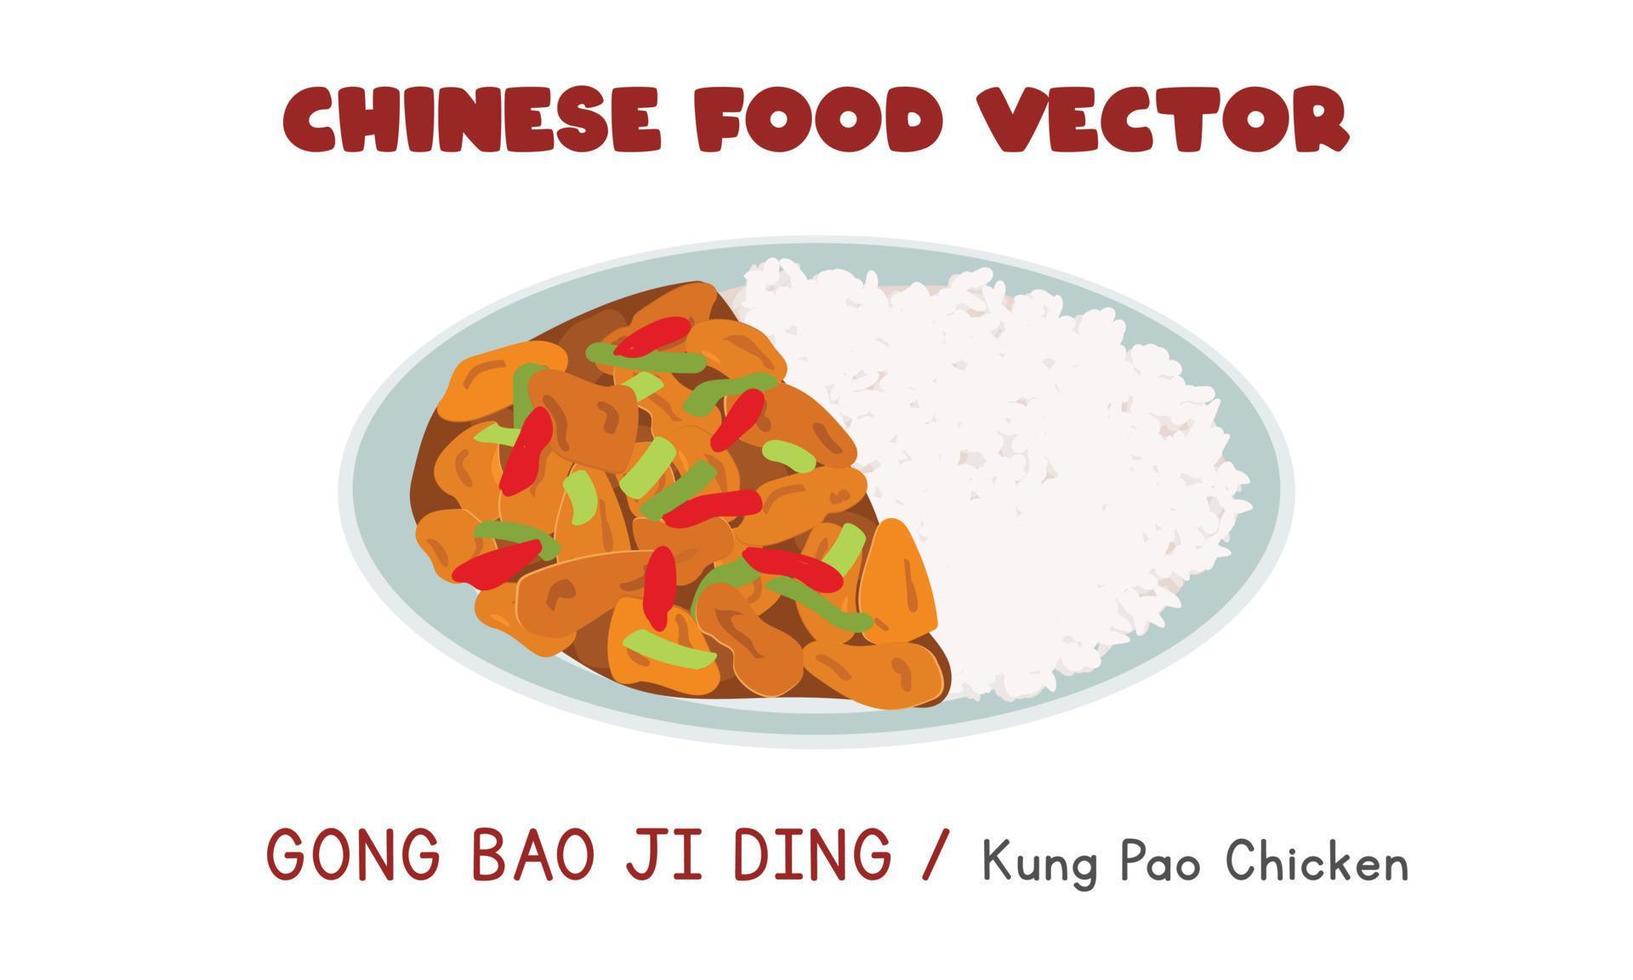 Chinese Gong Bao Ji Ding - Chinese Kung Pao Chicken flat vector design illustration, clipart cartoon style. Asian food. Chinese cuisine. Chinese food